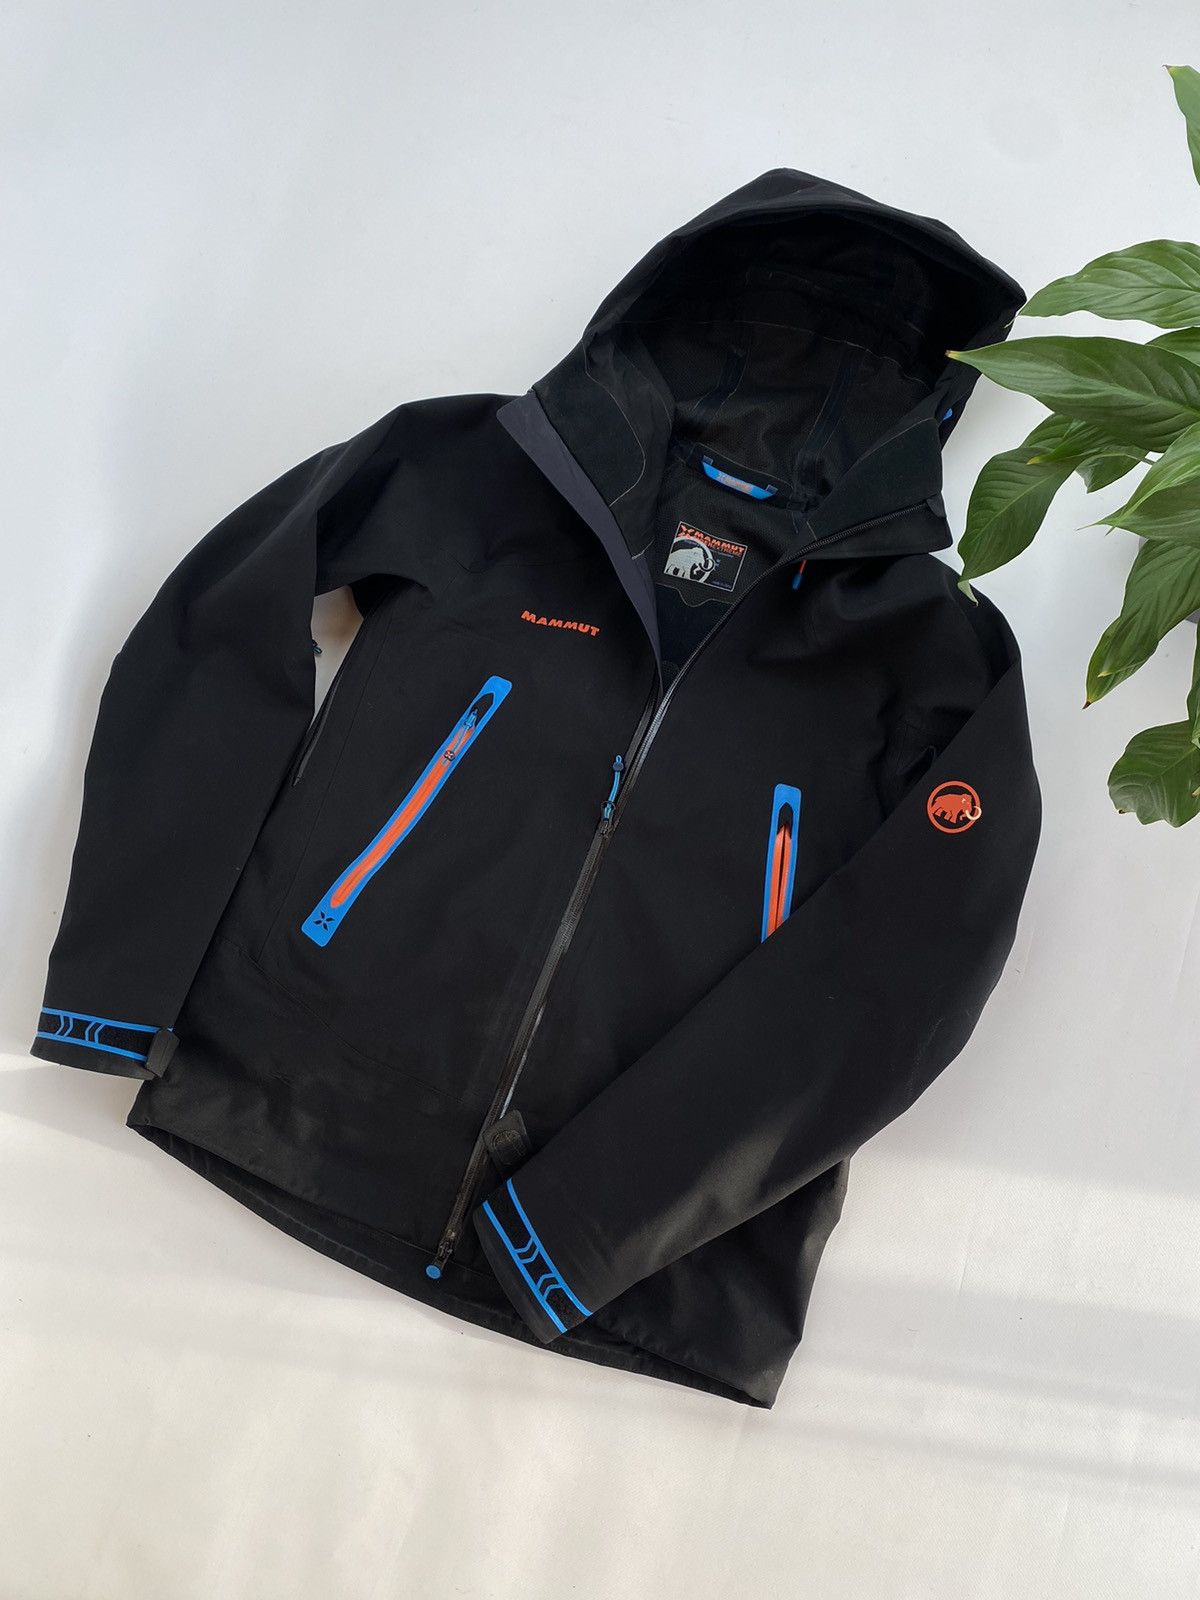 Outdoor Life Mammut Eiger Extreme Gore-Tex Jacket | Grailed